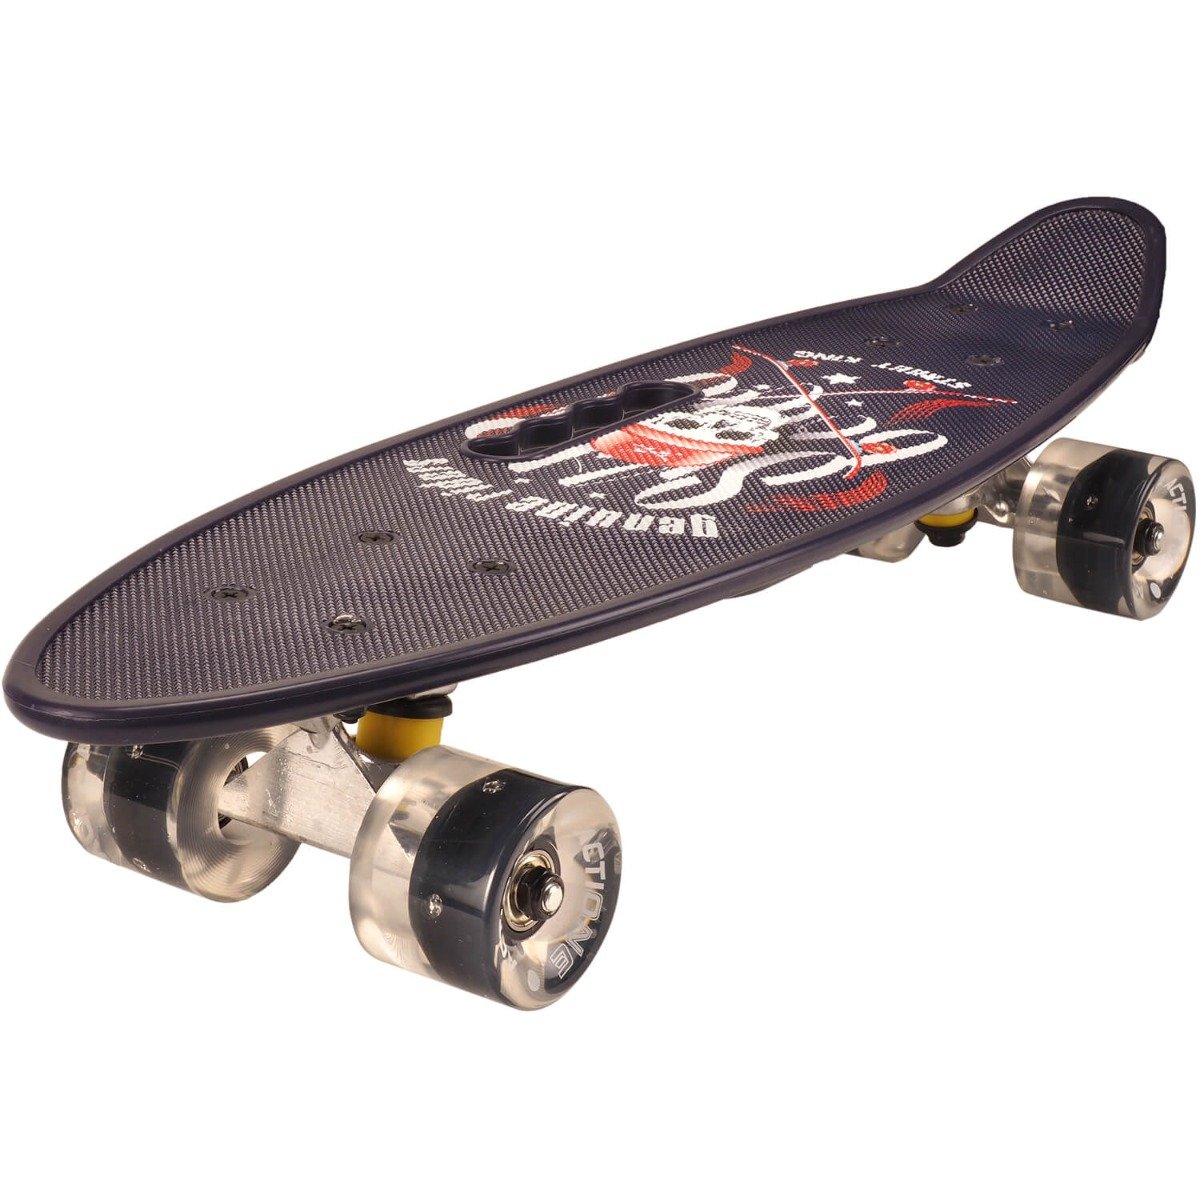 Penny board portabil Action One, ABEC-7, Street King Action One imagine 2022